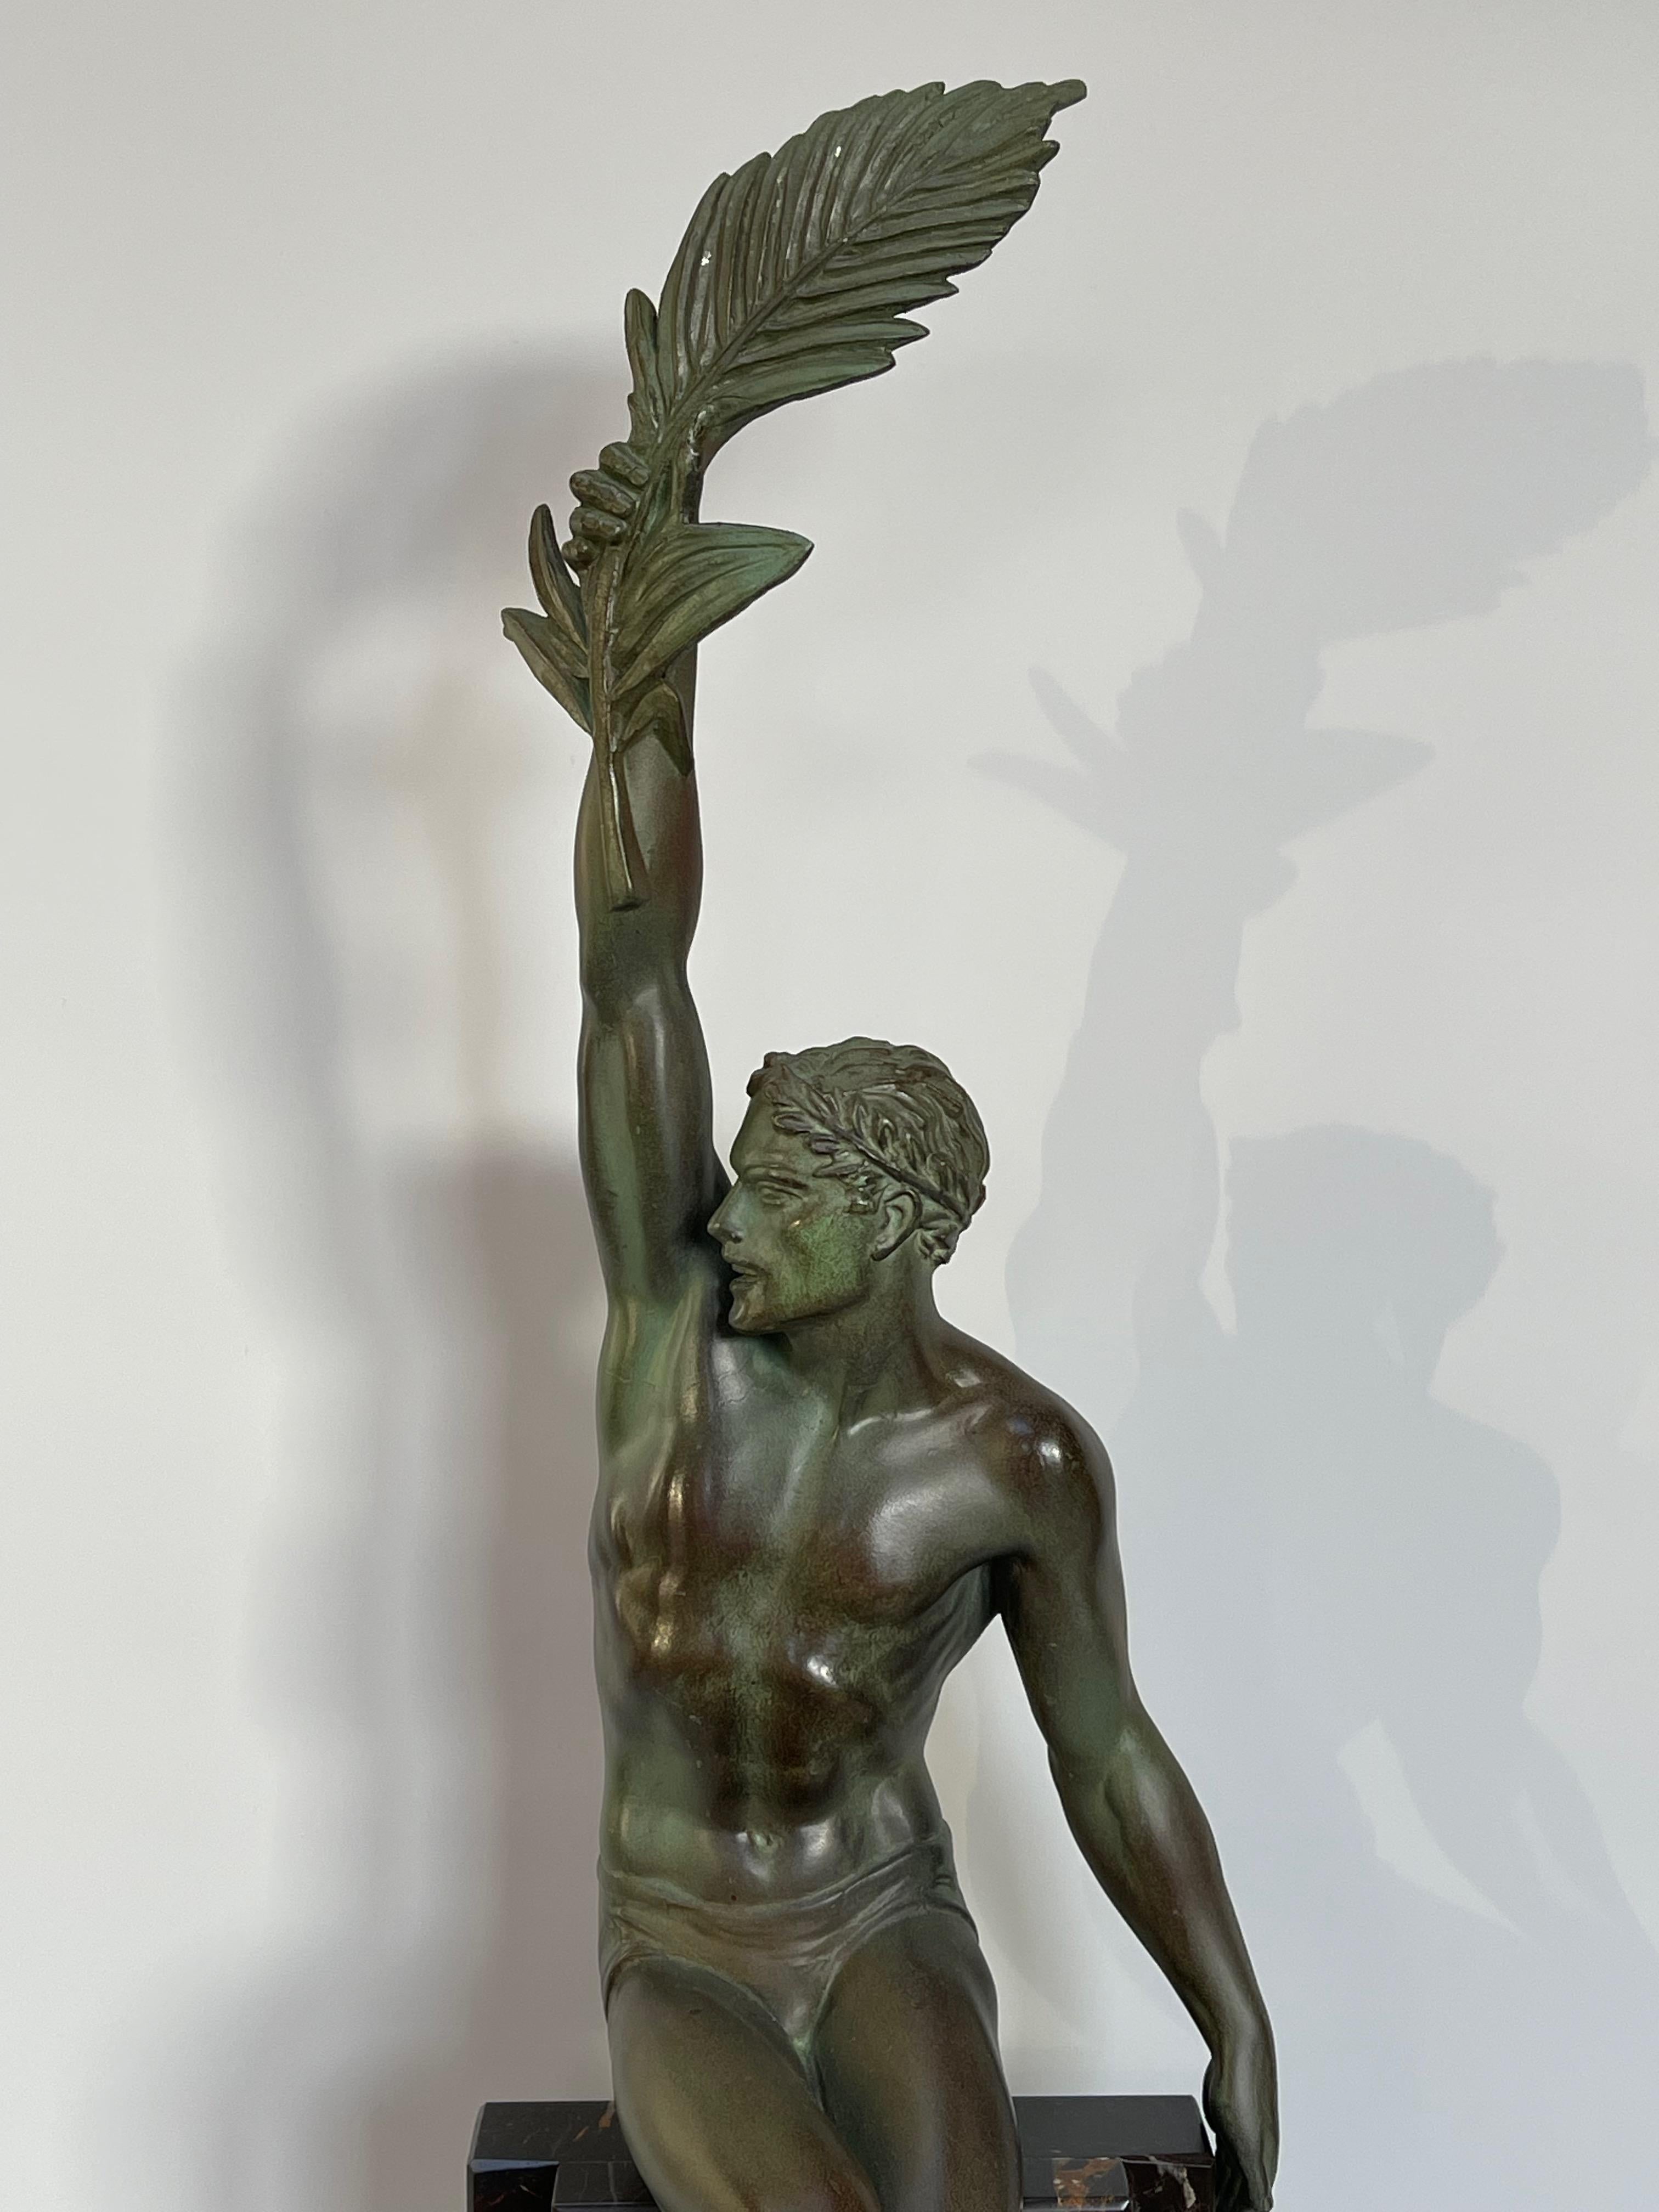 Art deco sculpture in spelter by Max le verrier with green patina on a black veined marble base, Gloire model by le Faguays, signed on the marble.
Length: base 16cm
Depth: 10cm
Height: 61cm
Weight: 7Kg

Louis Octave Maxime Le Verrier was born to a